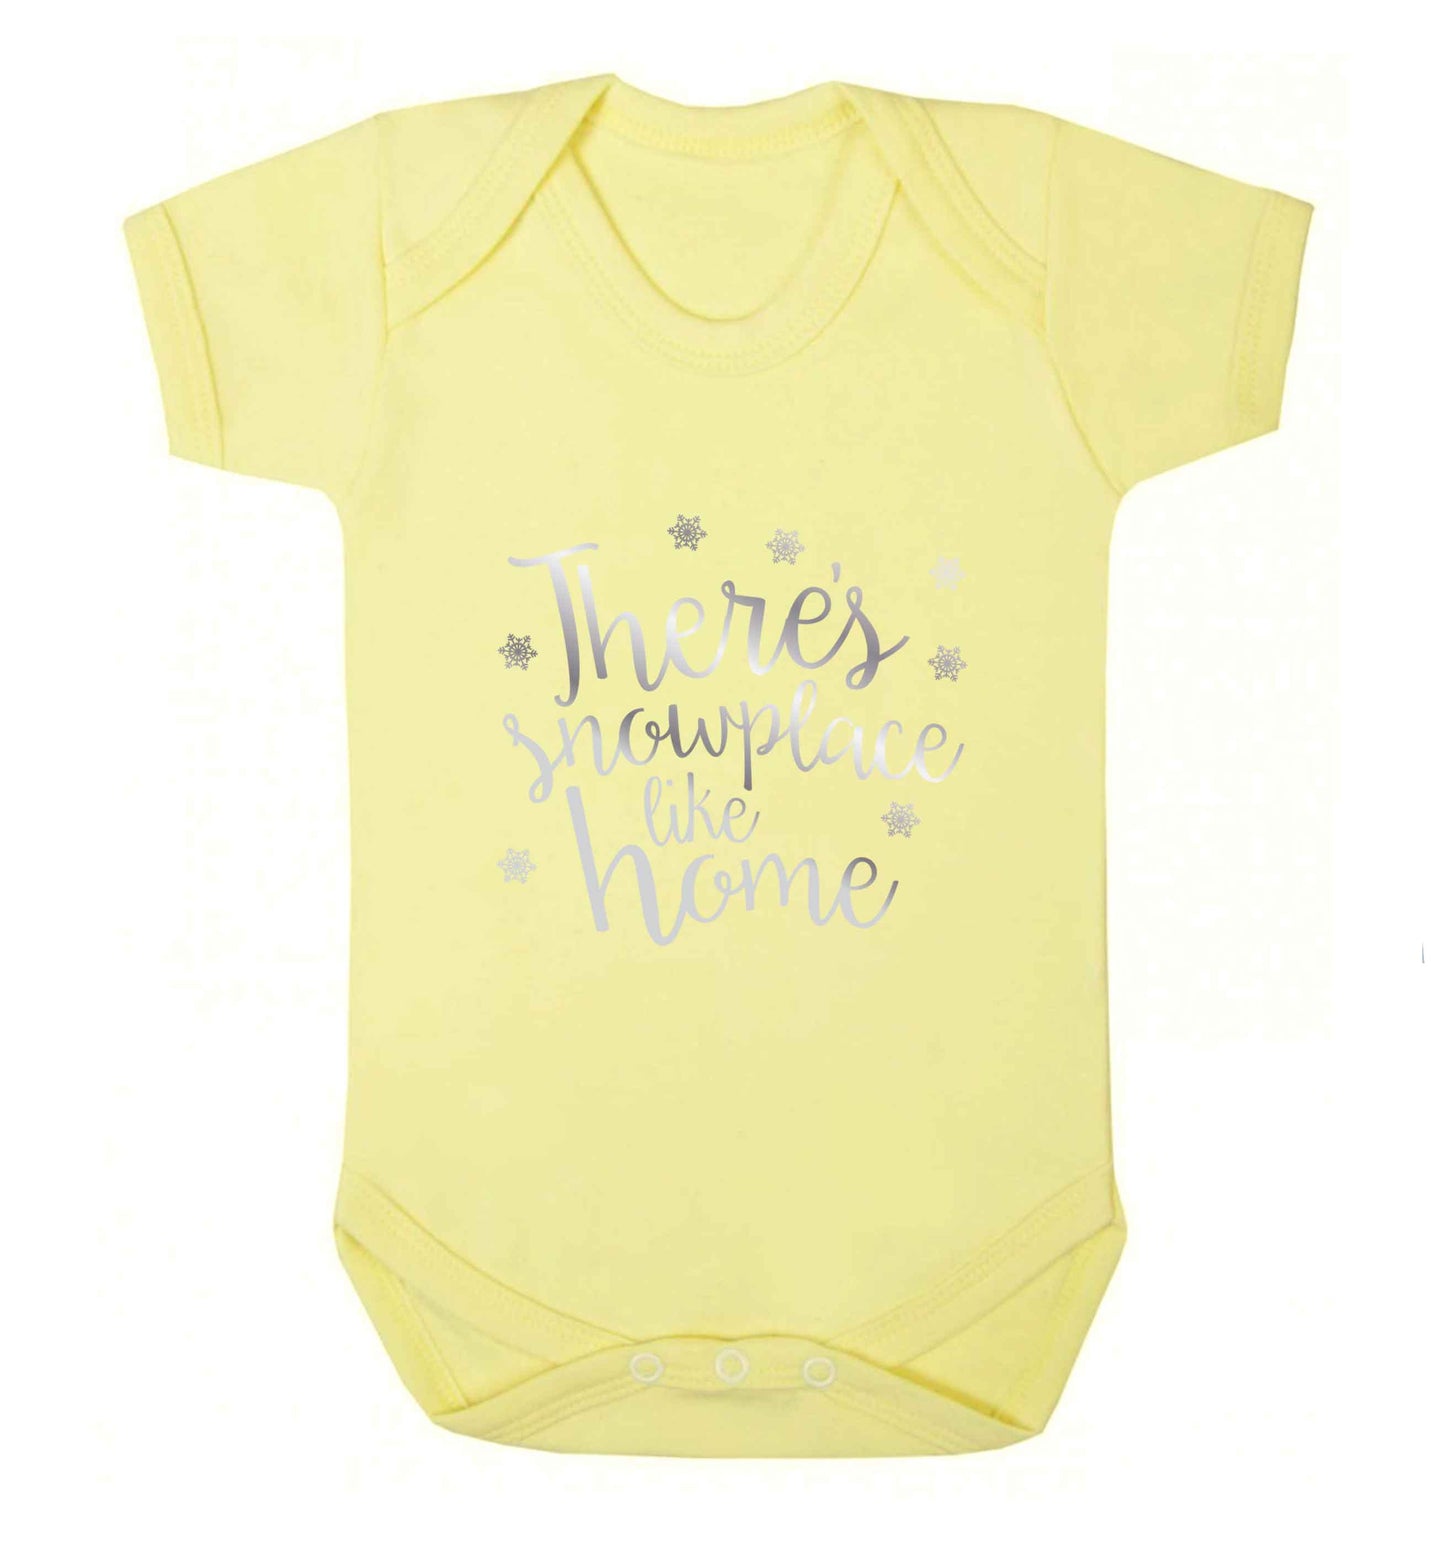 There's snowplace like home - metallic silver baby vest pale yellow 18-24 months